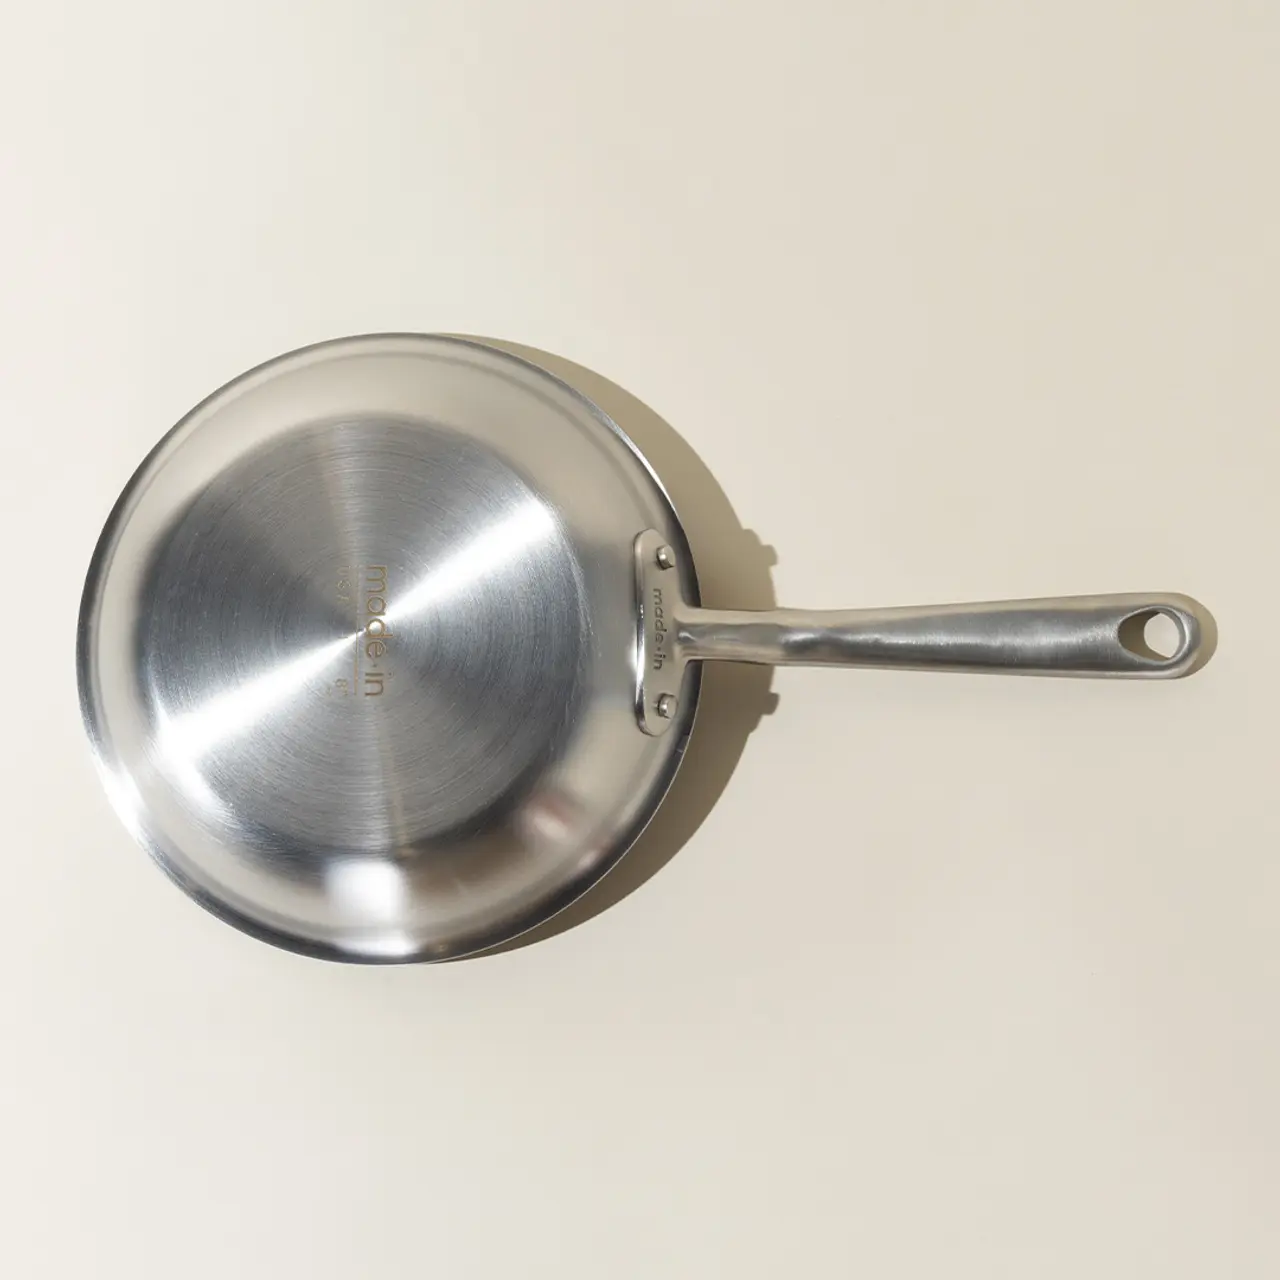 A stainless steel frying pan is shown against a neutral background from a top-down perspective.